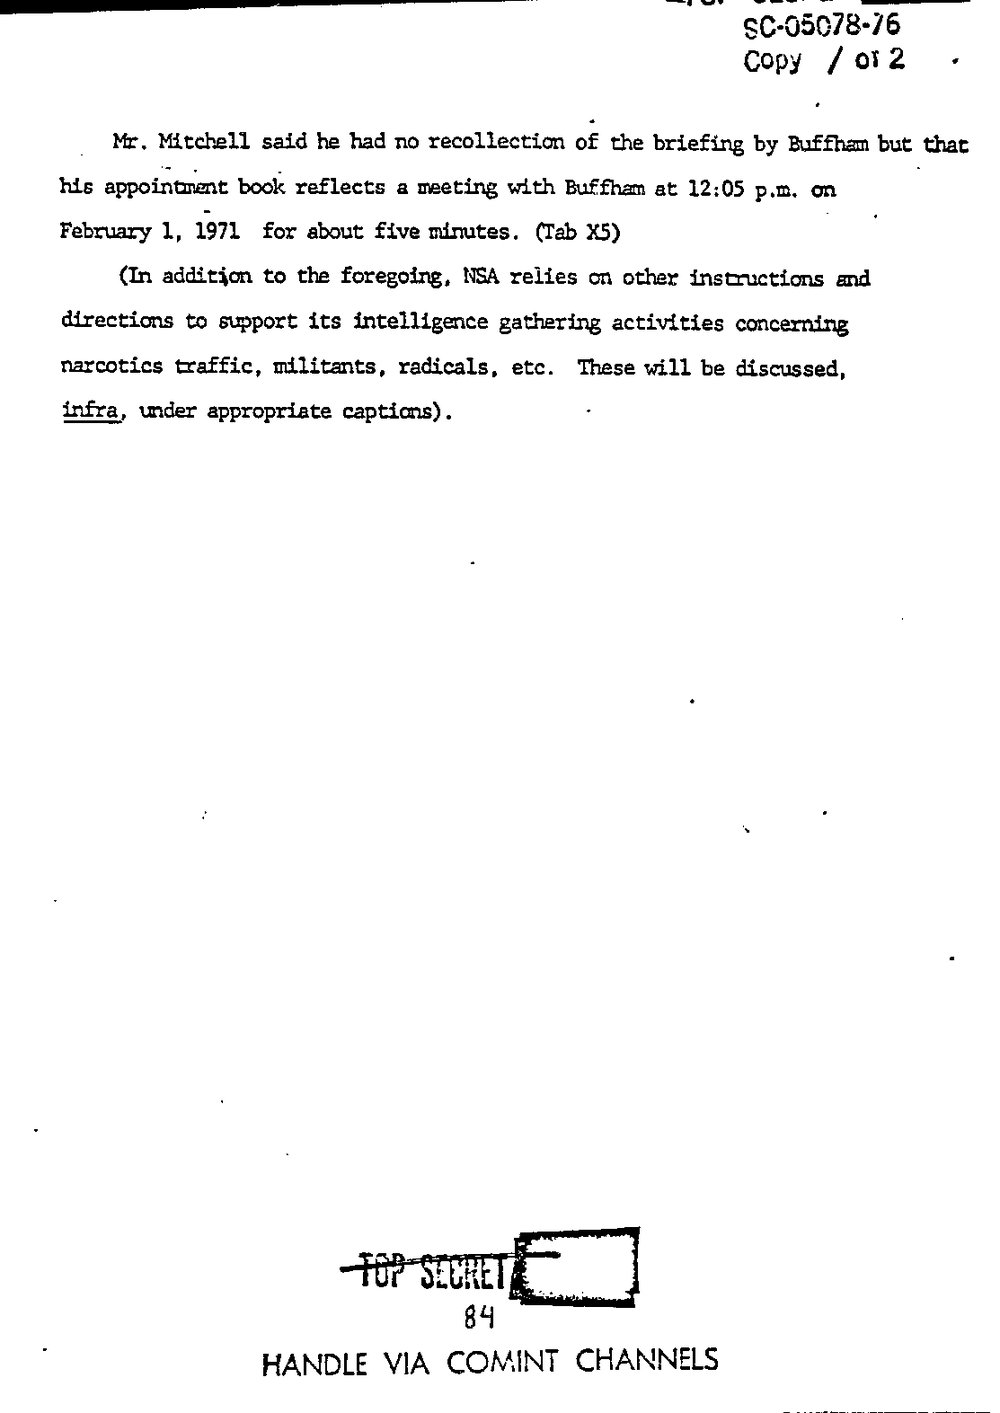 Page 92 from Report on Inquiry Into CIA Related Electronic Surveillance Activities